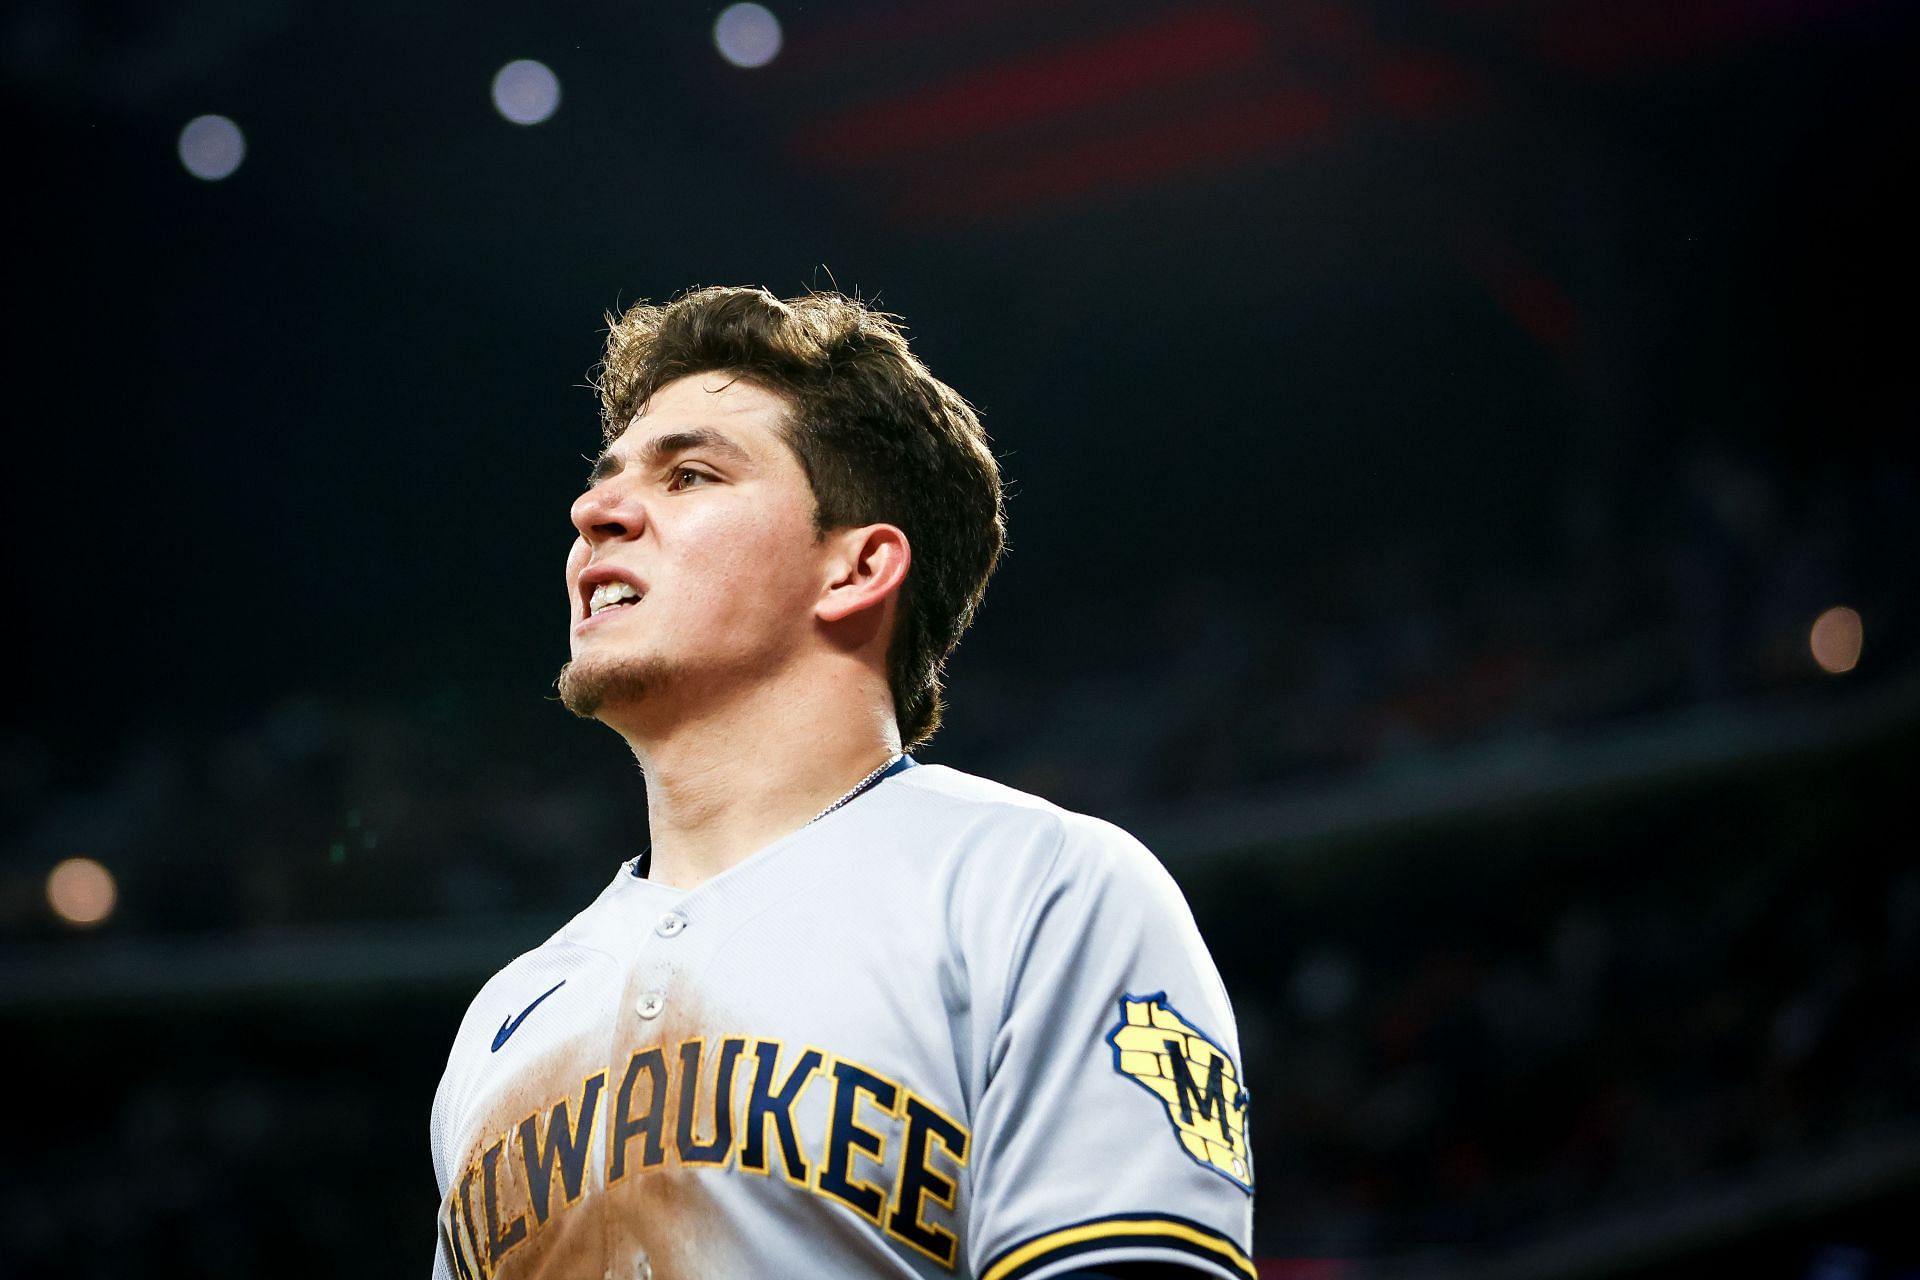 Milwaukee Brewers have lost two straight to the Chicago Cubs.